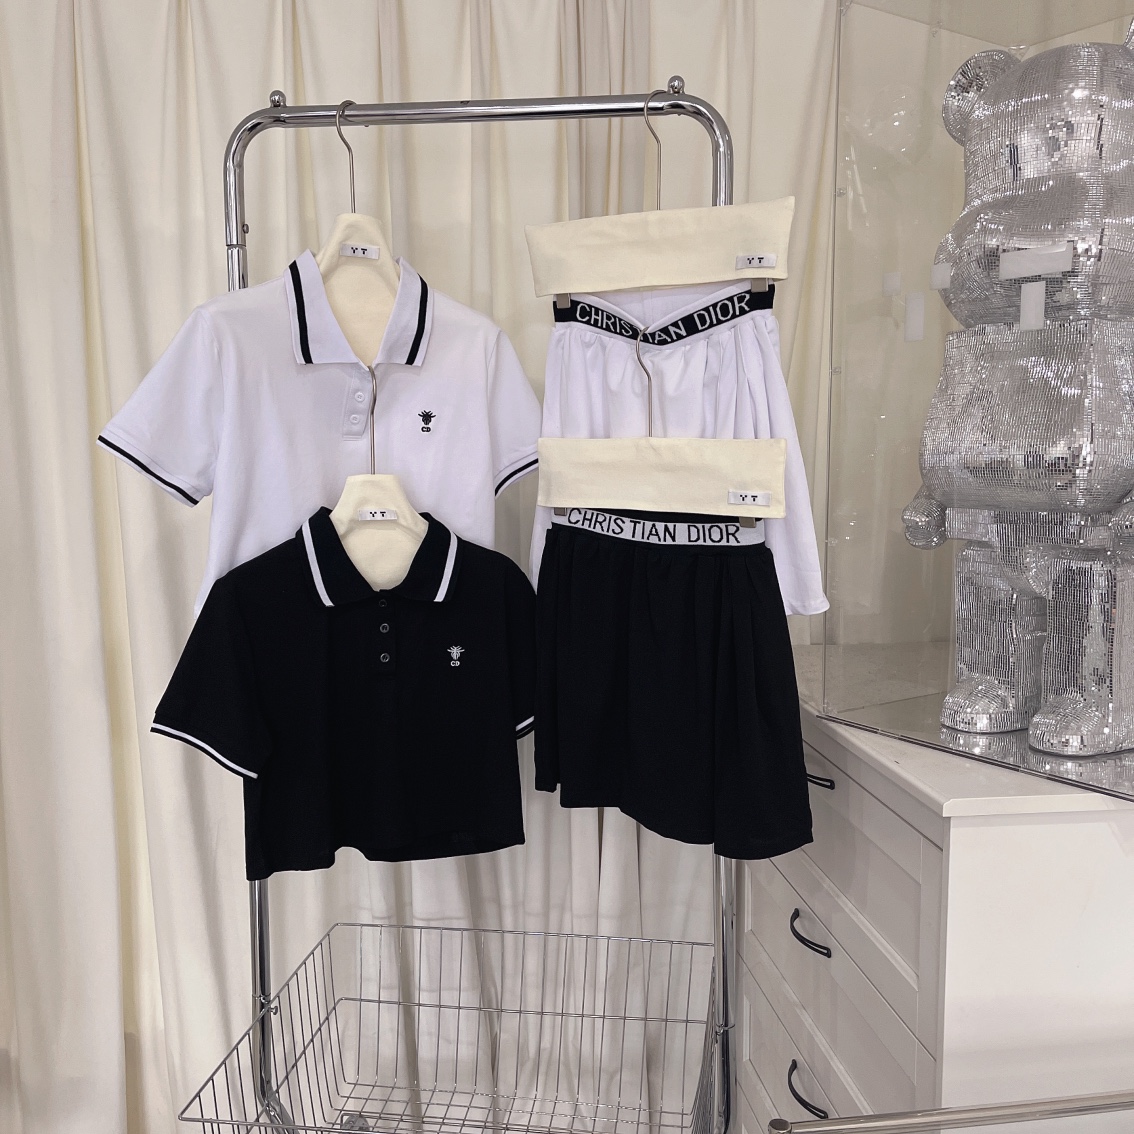 Dior Clothing Polo Shirts & Blouses Skirts Black White Summer Collection